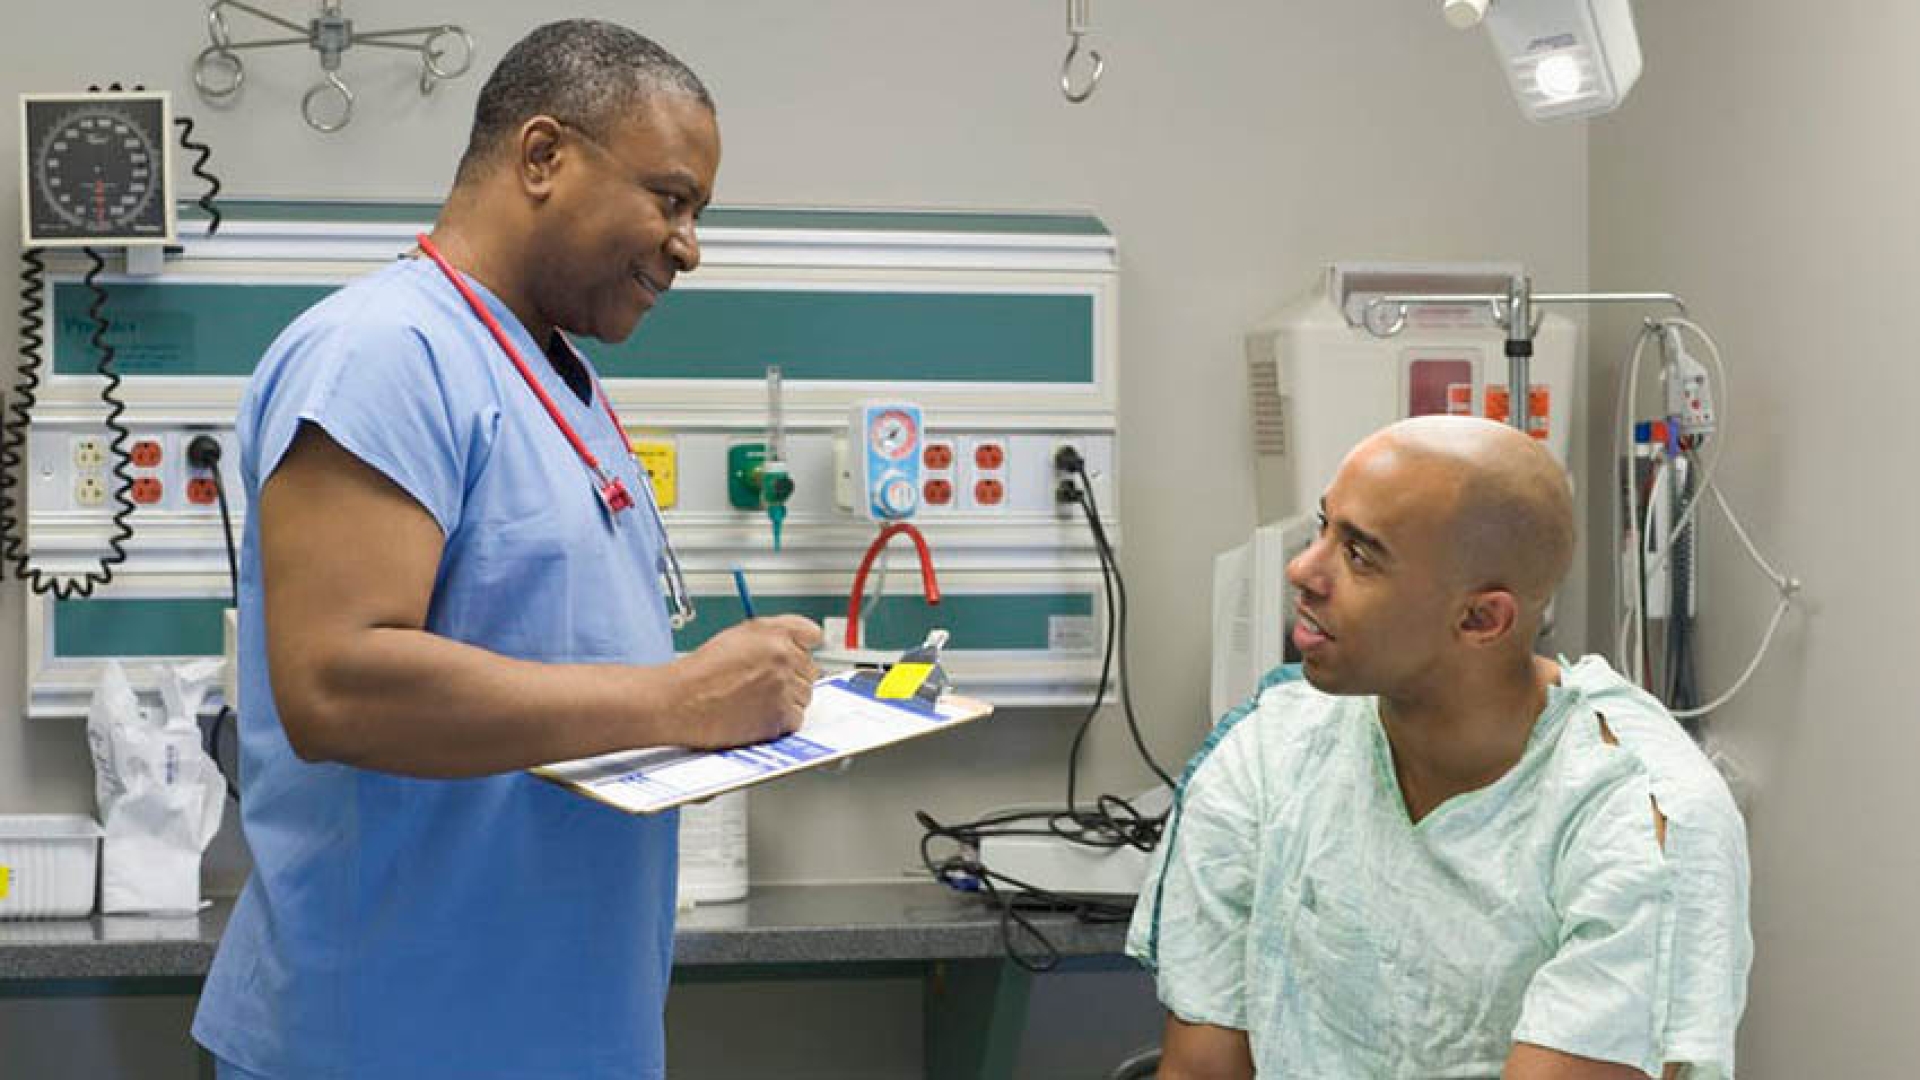 Minority Patients Benefit From Having Minority Doctors, But That's a Hard  Match to Make